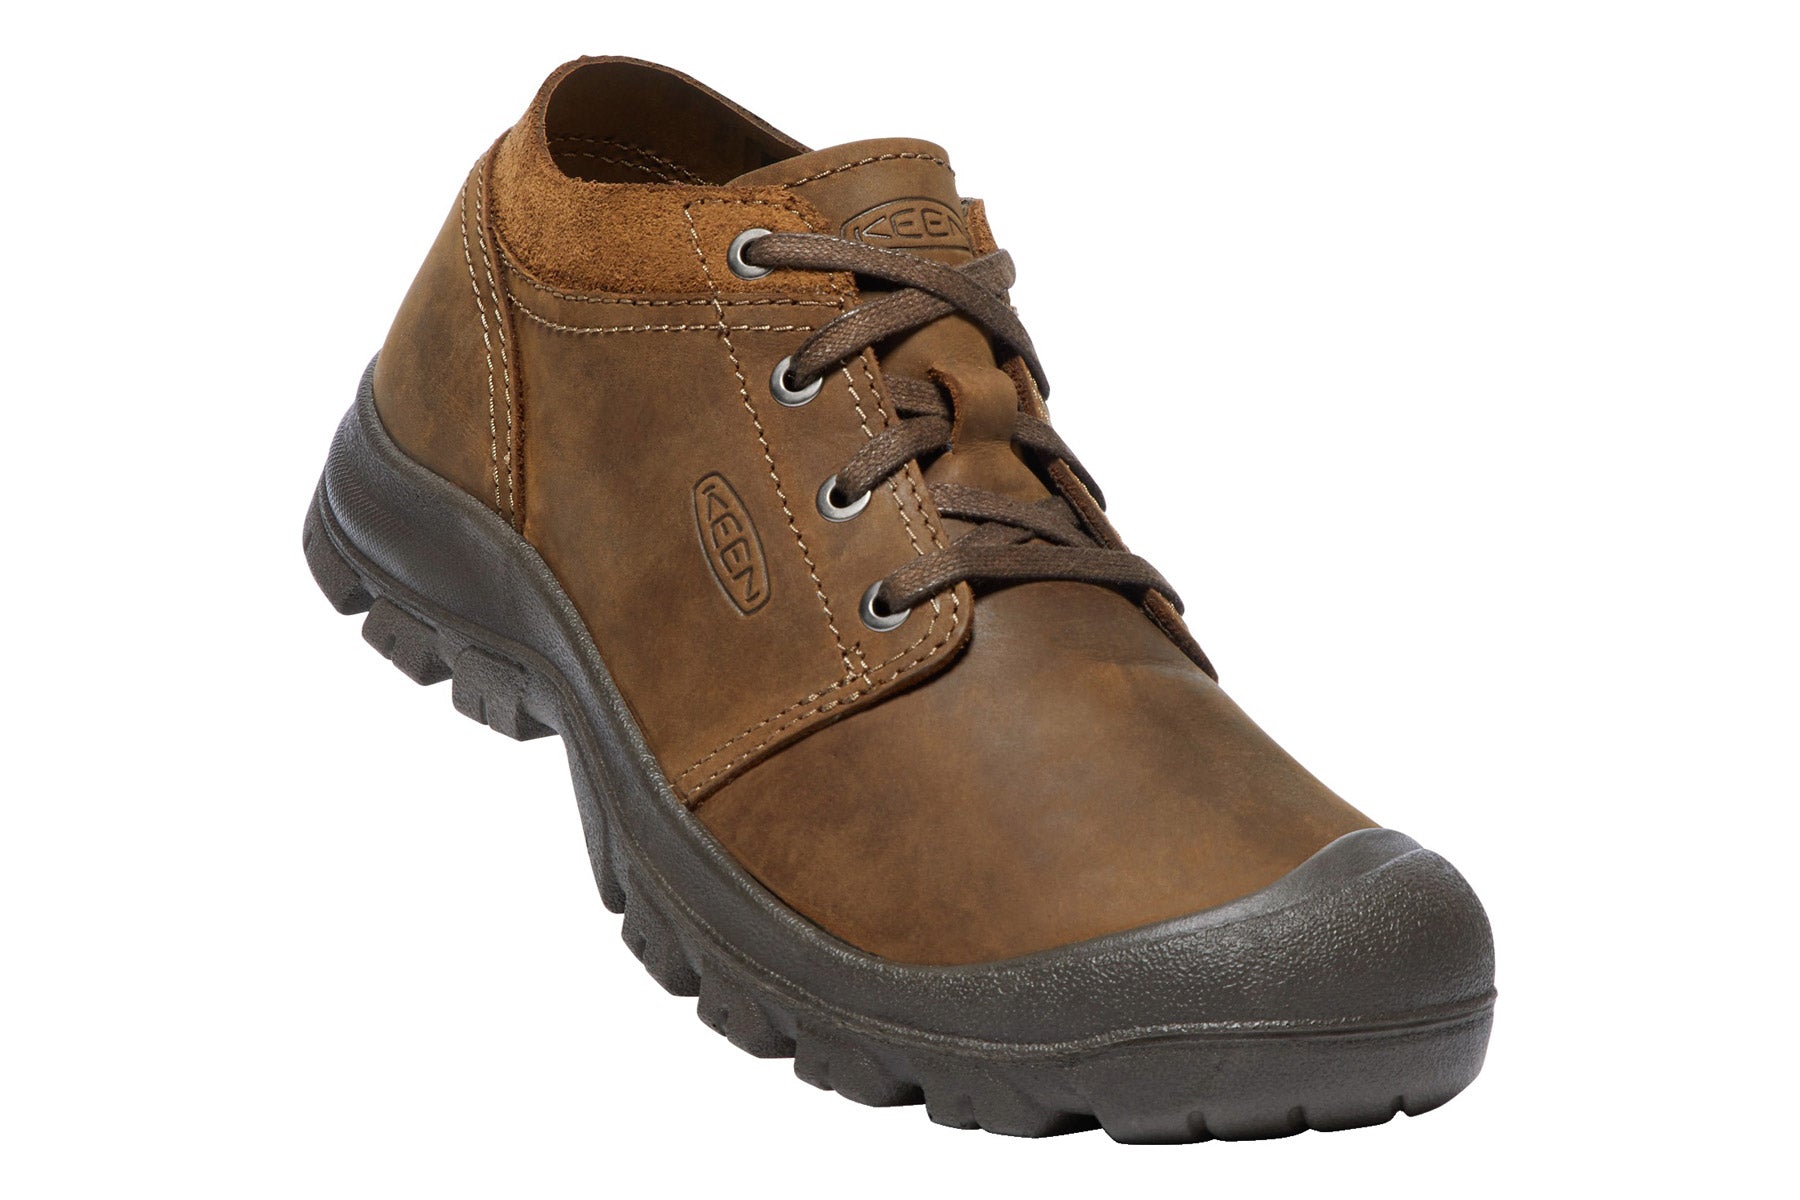 Keen Grayson Oxford Fg product image